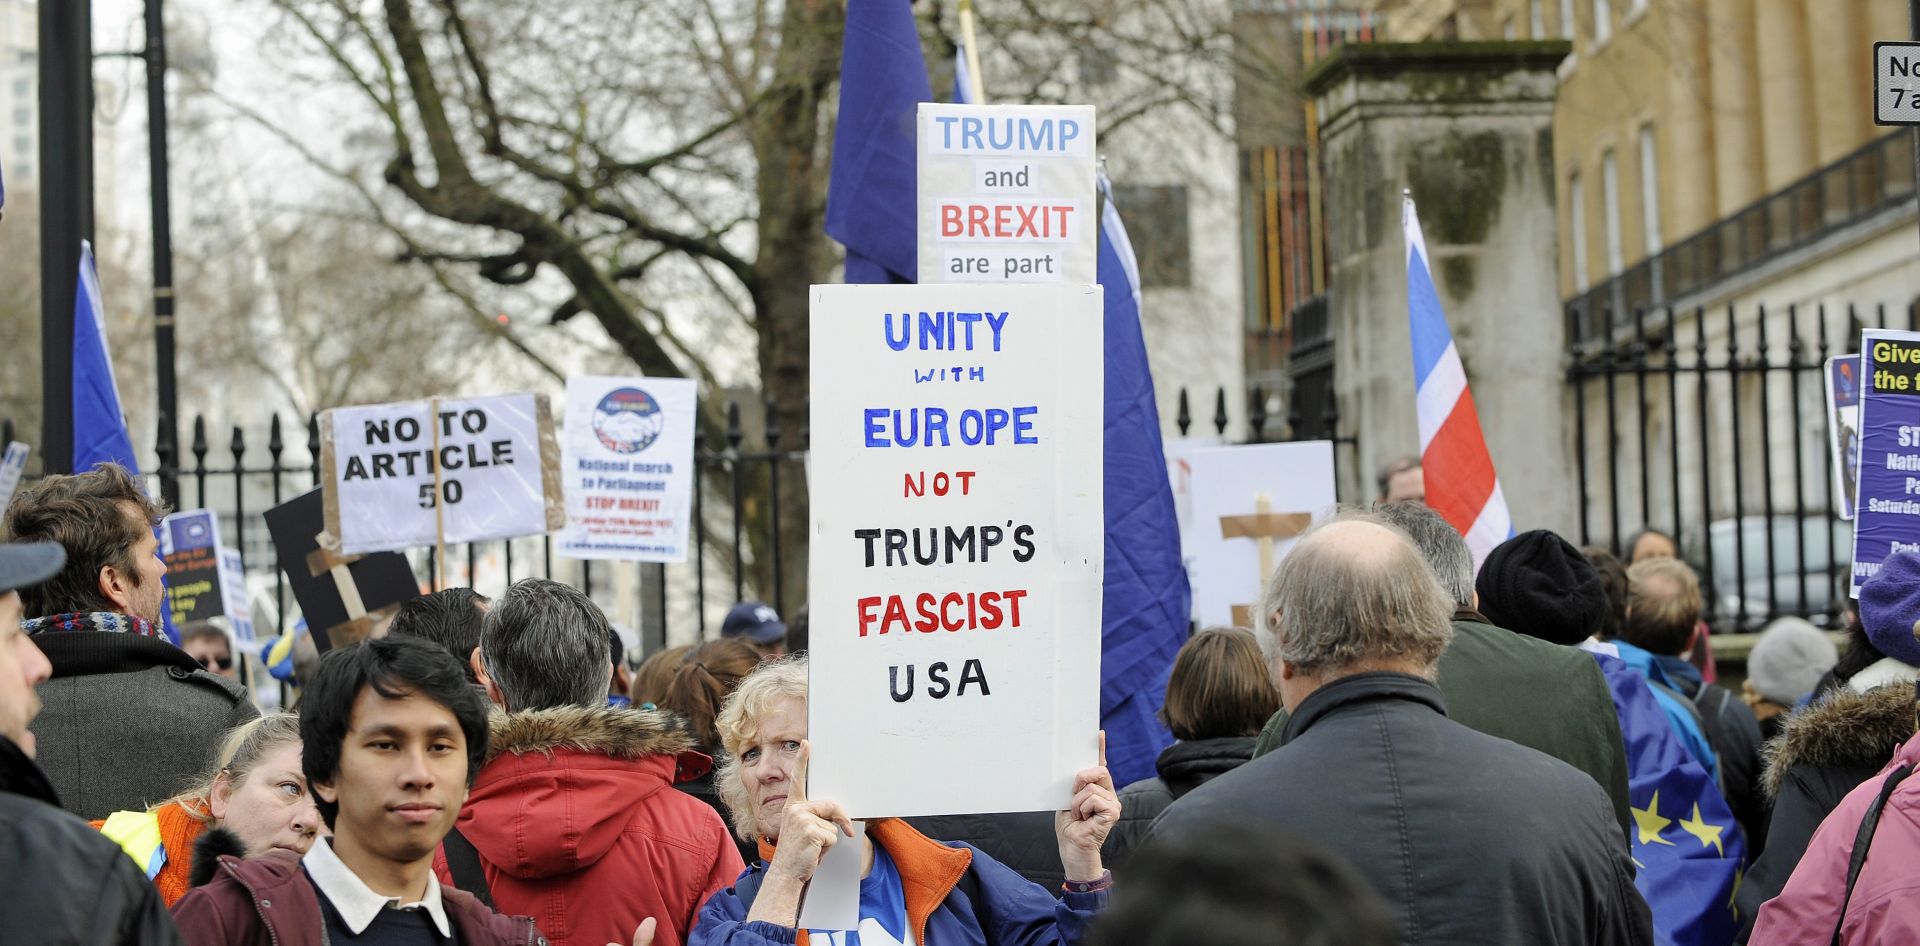 epa05770408 People take part in a pro-Europe demonstration outside No 10 Downing Street, in London, Britain, 04 February 2017. An anti-Trump march is scheduled to leave the US embassy to Downing Street later in the day as well.  EPA/GERRY PENNY